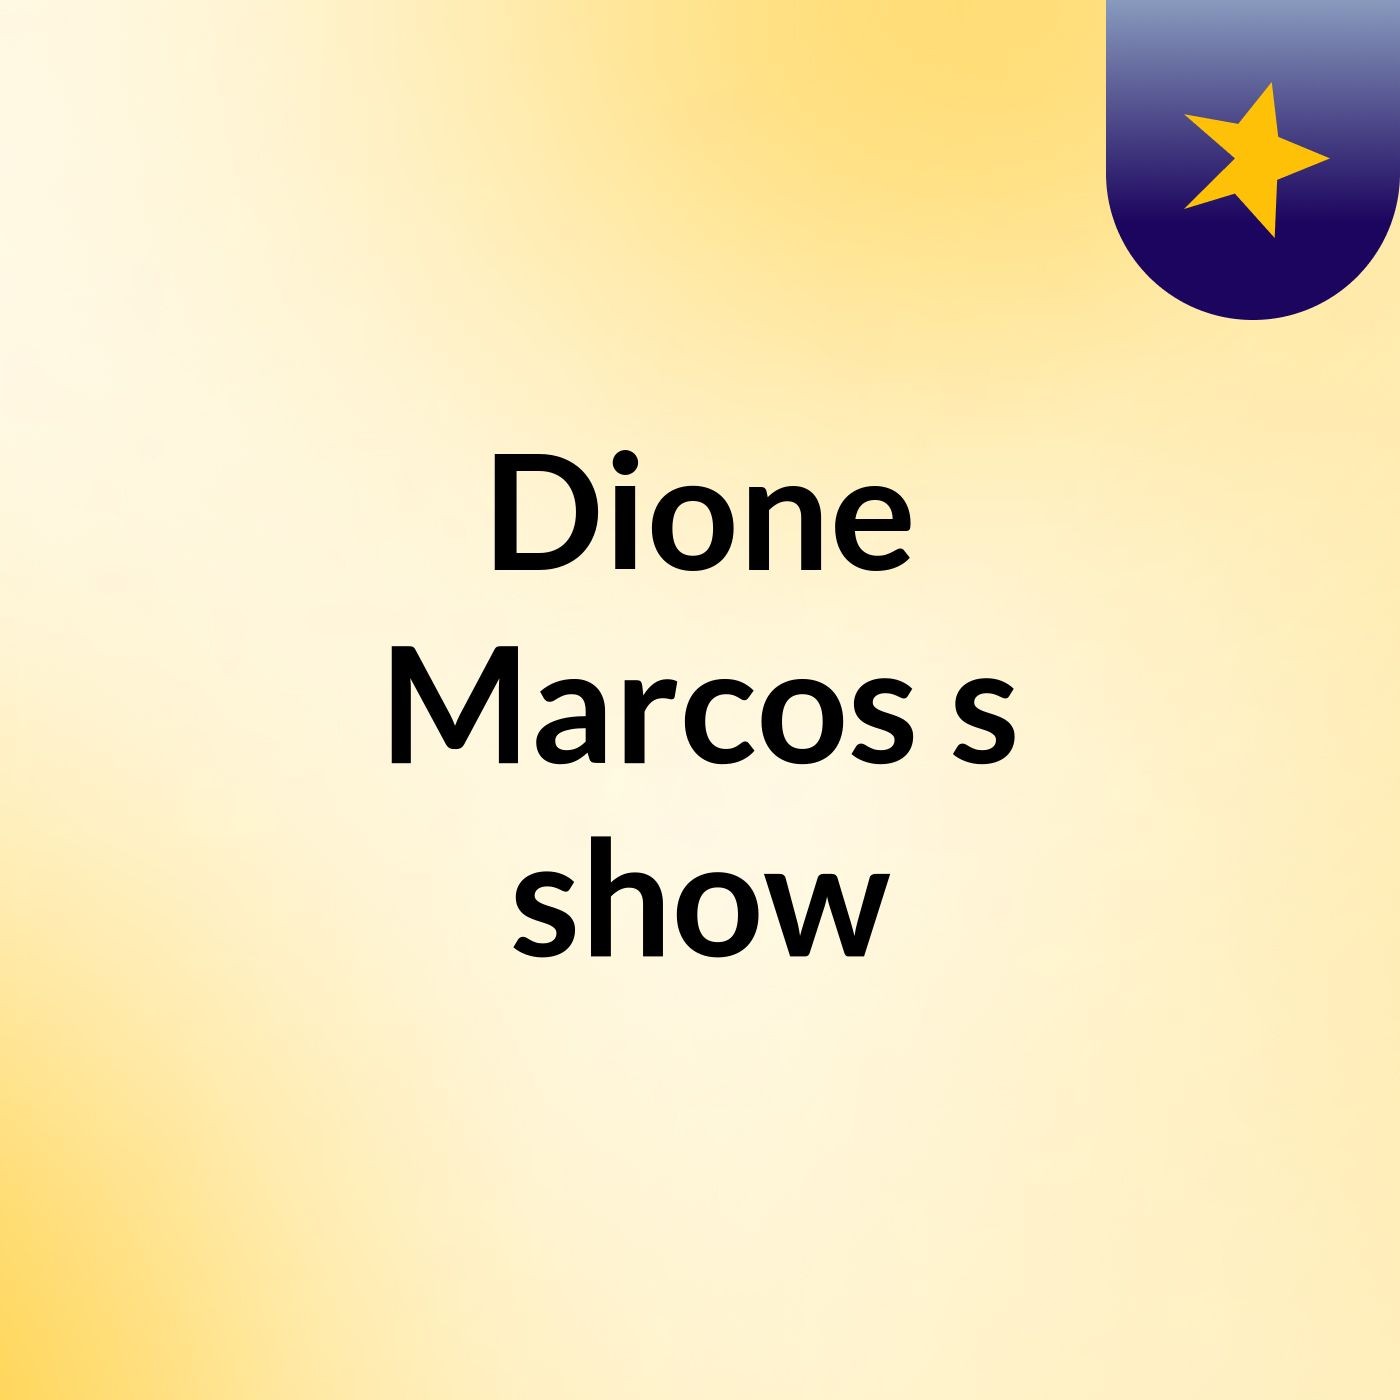 Dione Marcos's show